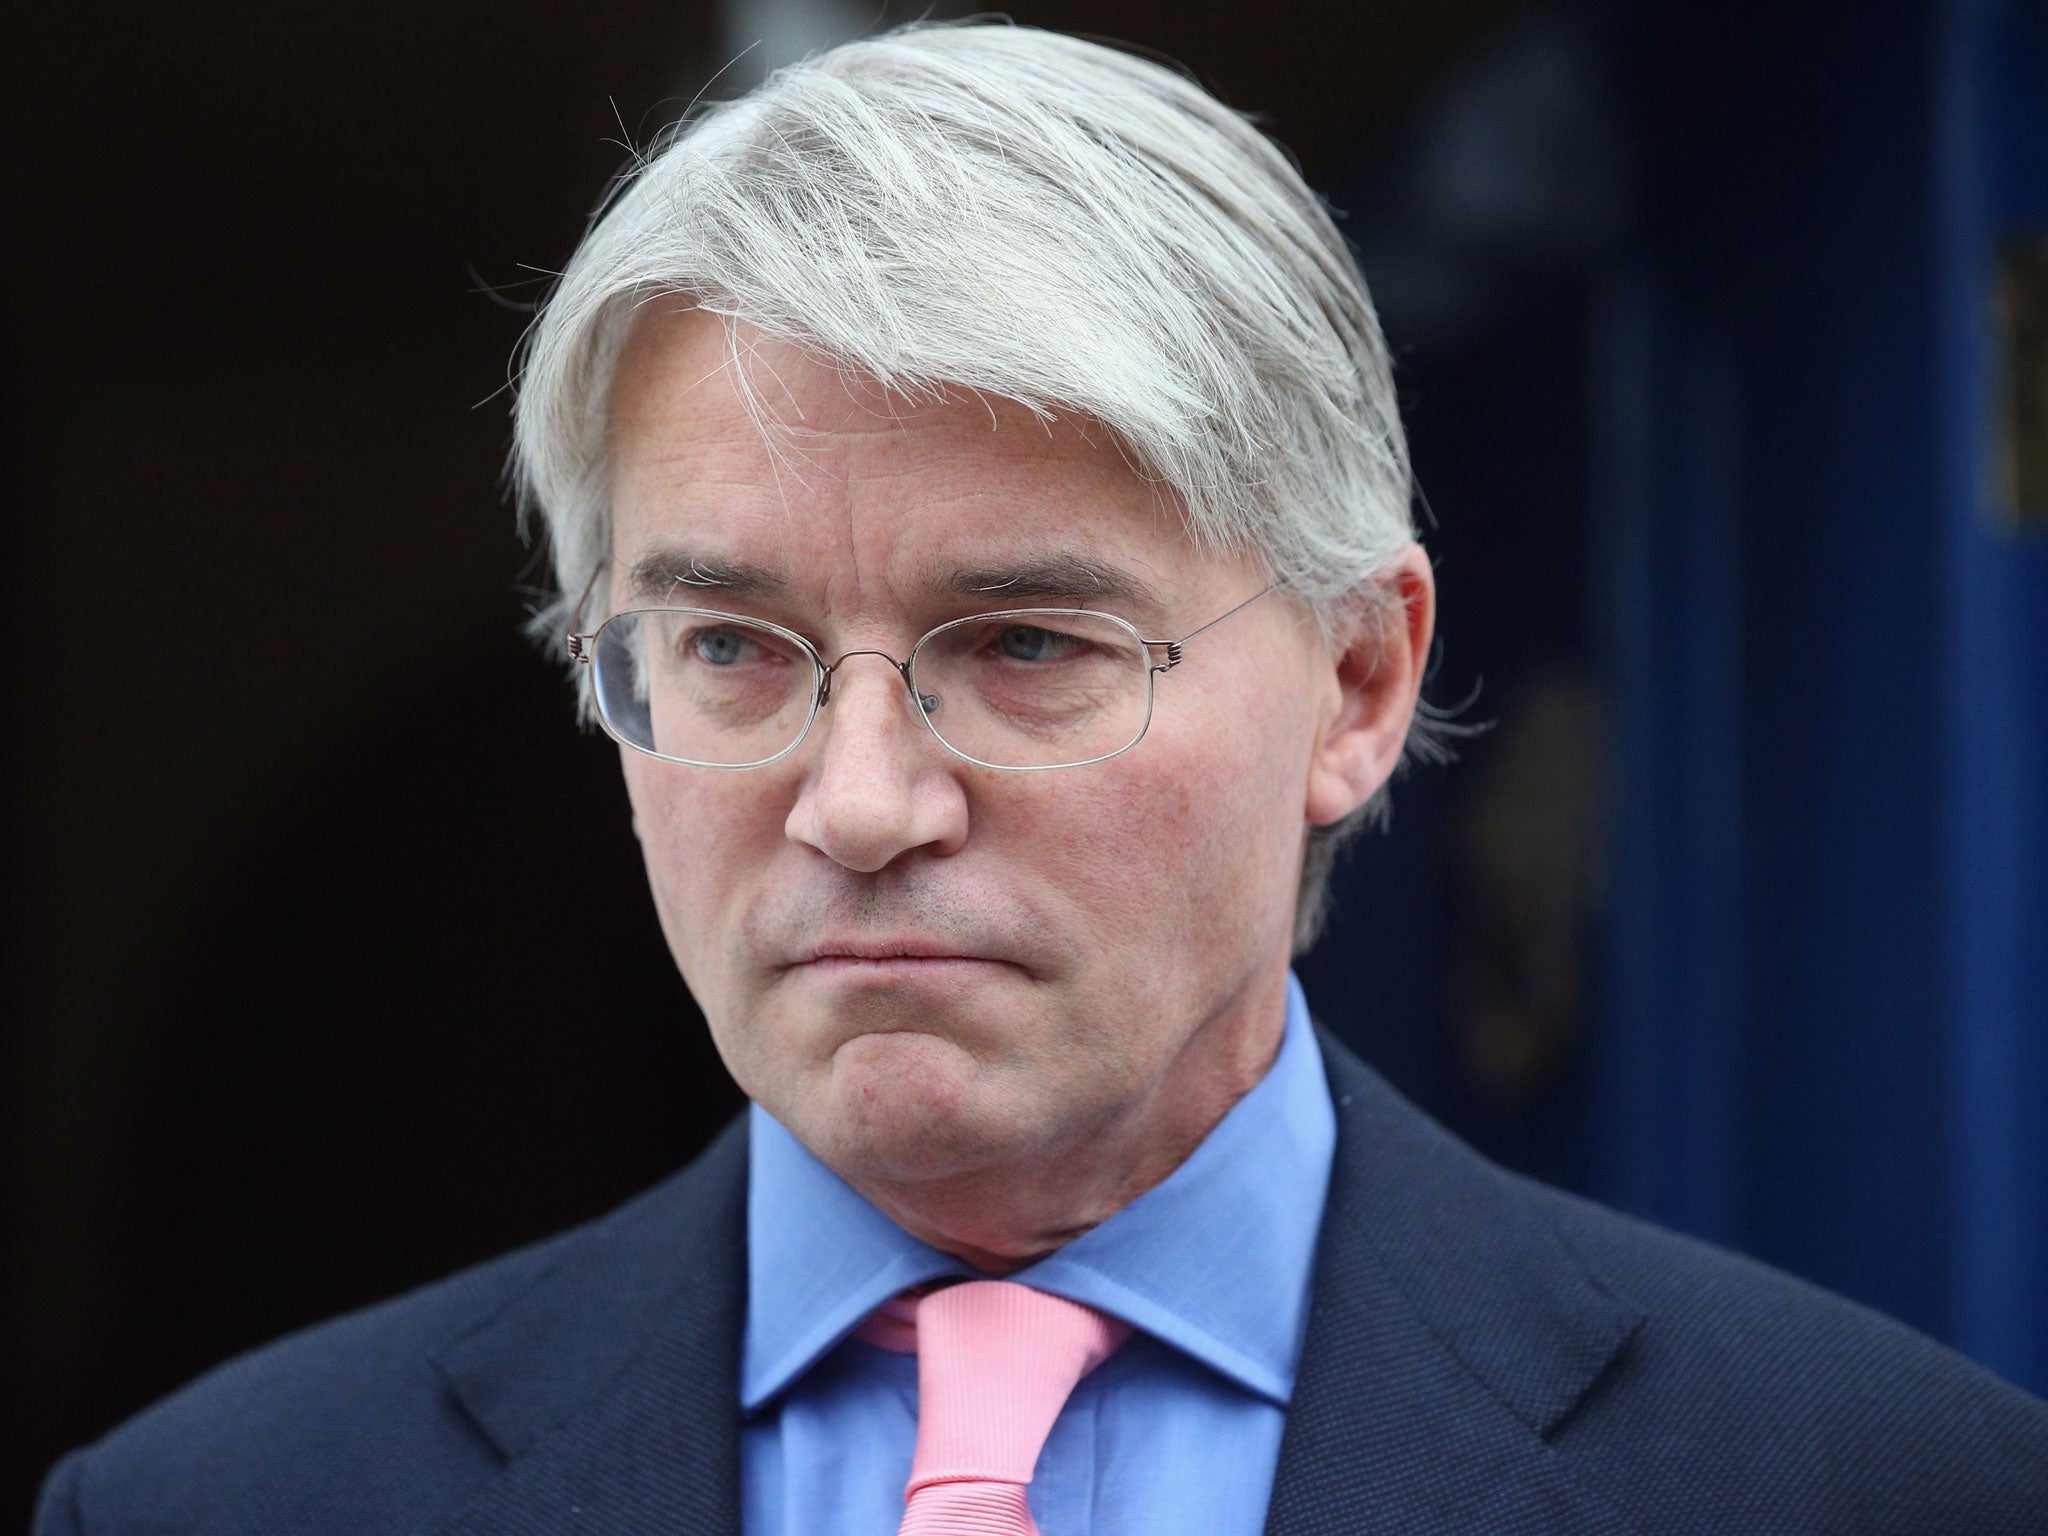 Andrew Mitchell, the former Chief Whip, has found a new outlet for his talents